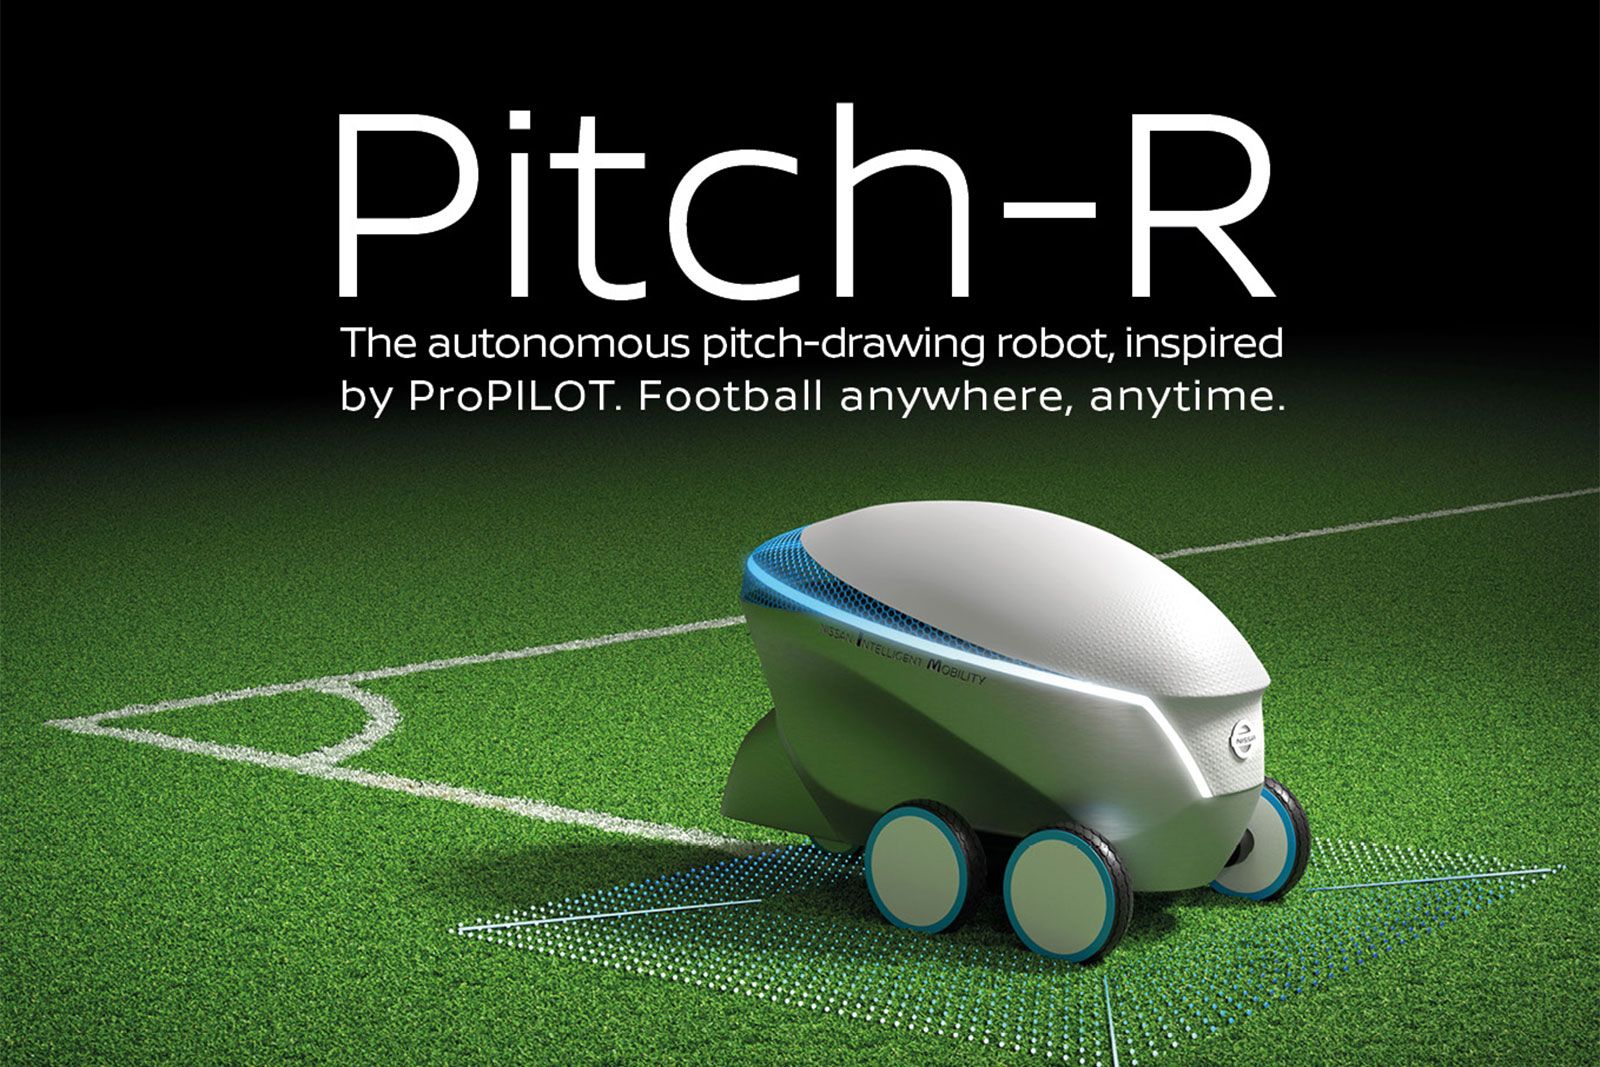 Nissan Pitch-R is a self-driving pitch-drawing robot image 1